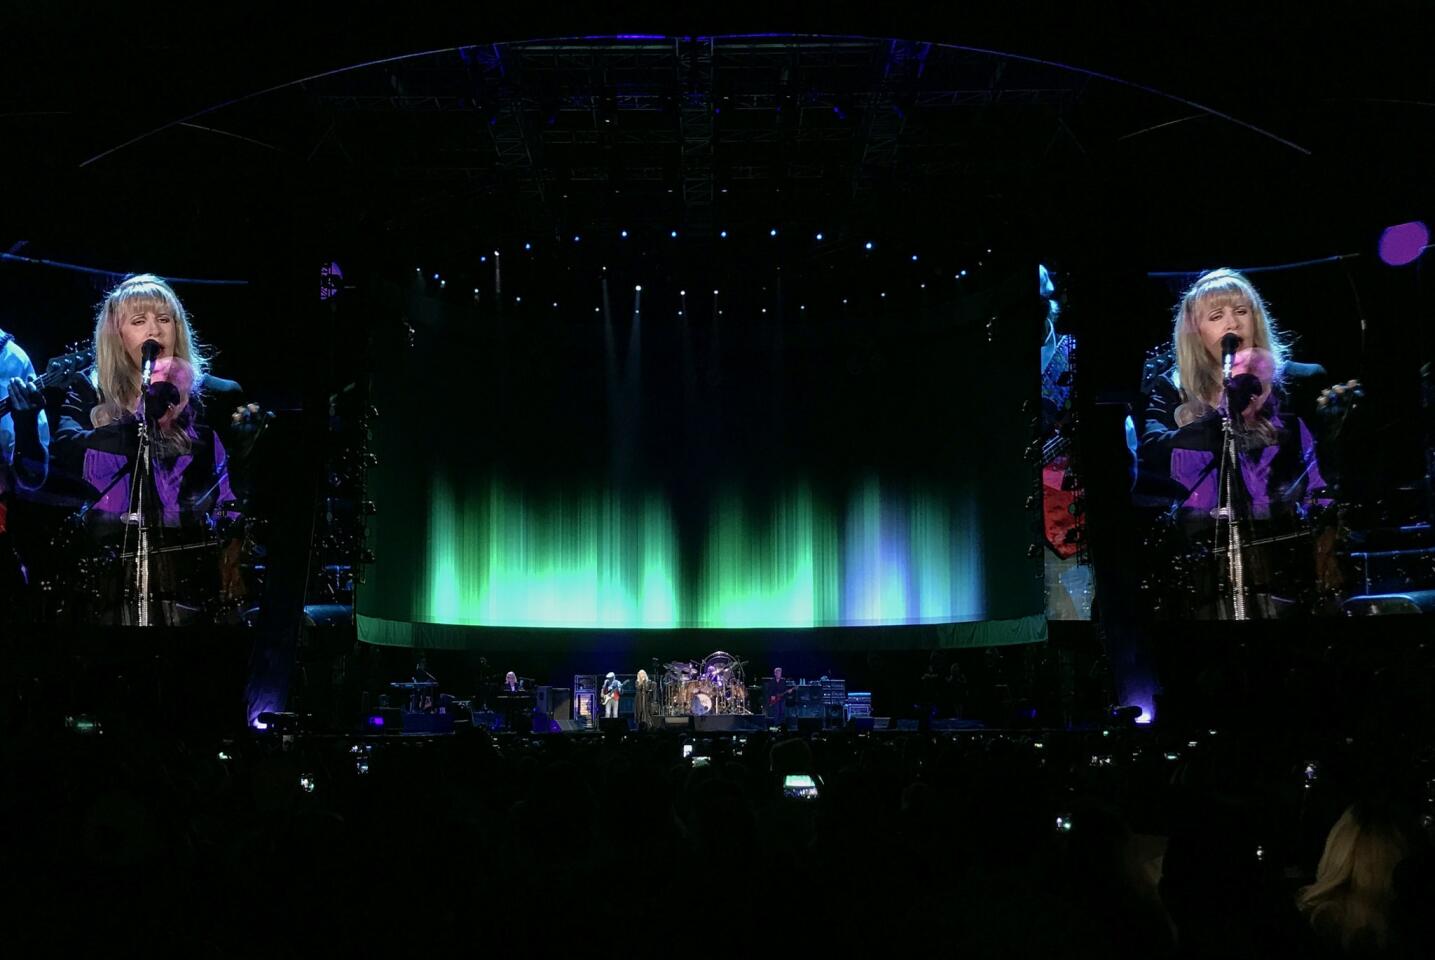 Fleetwood Mac on stage with lead singer Stevie Nicks' image projected on the screens during the Classic West festival at Dodger Stadium in Los Angeles.